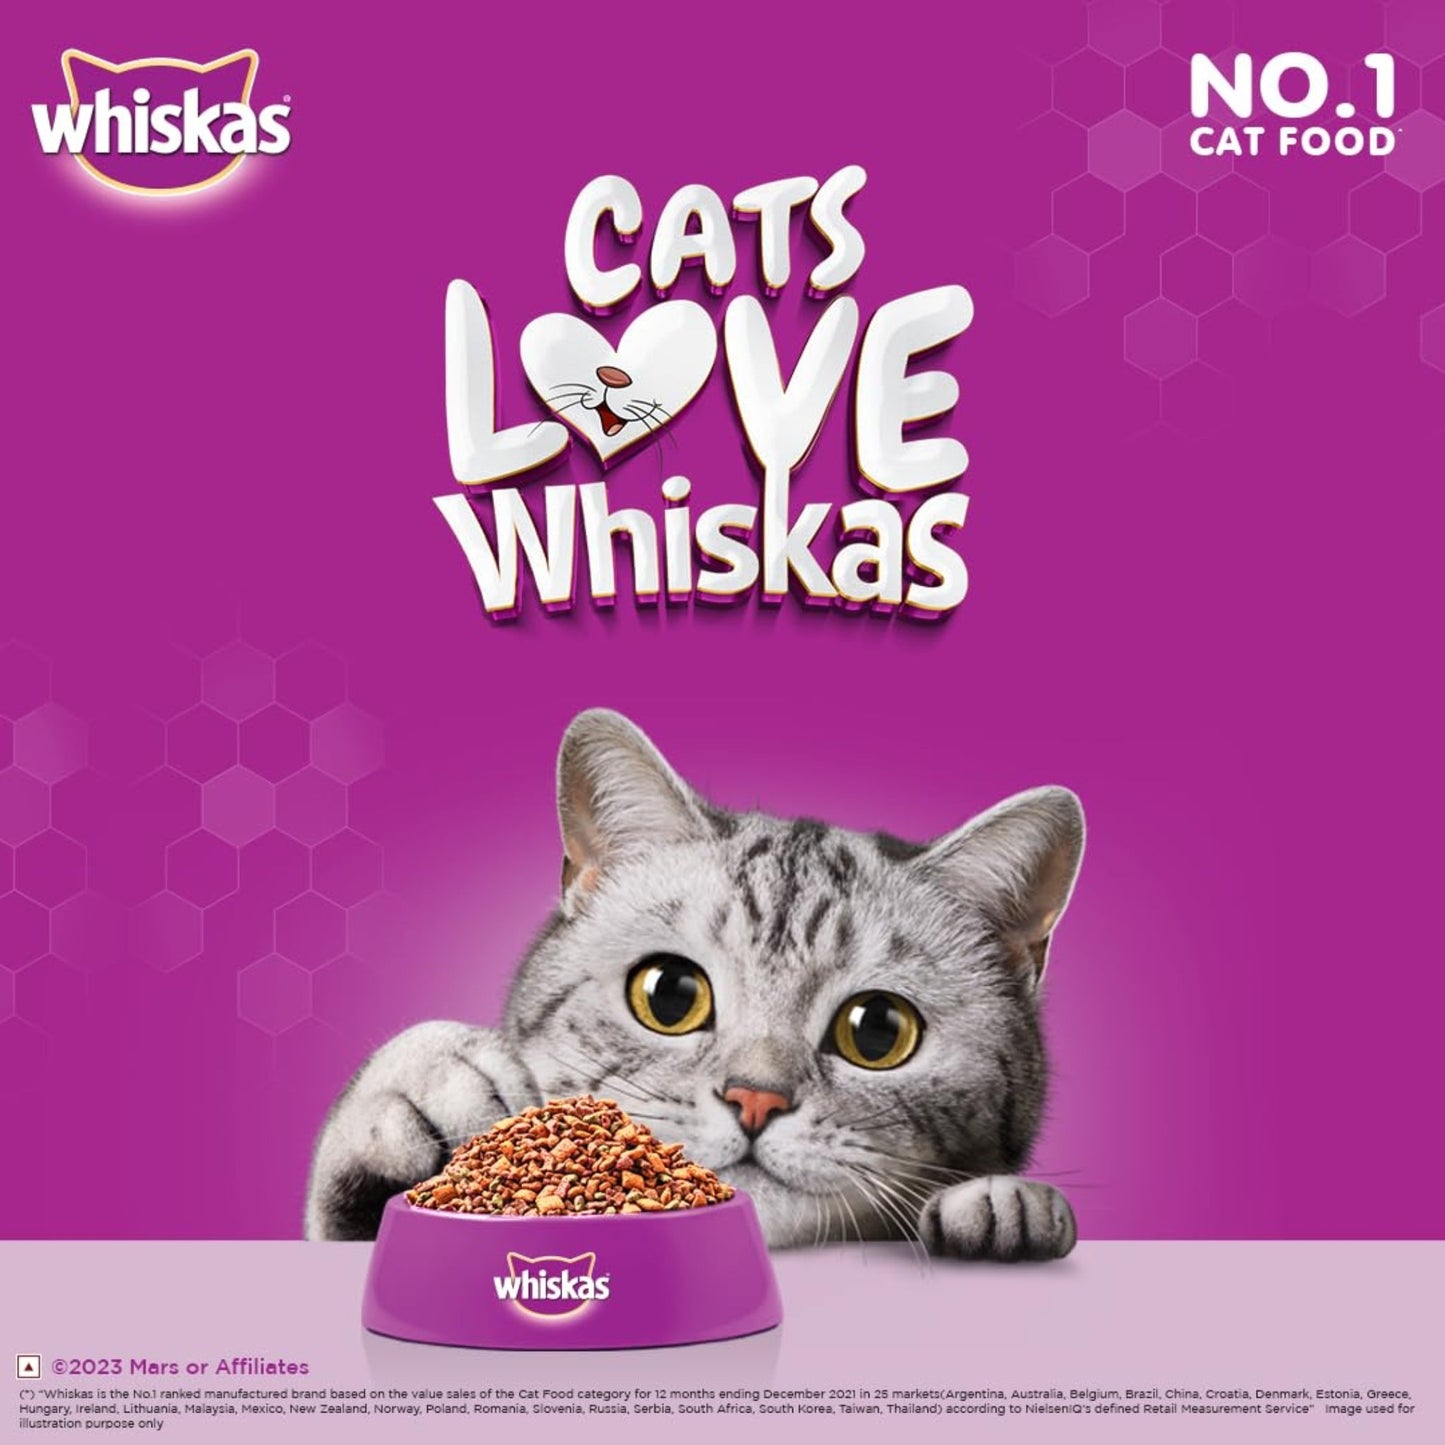 Whiskas Dry Food for Adult Cats (1+ Years), Tuna Flavor, 480g